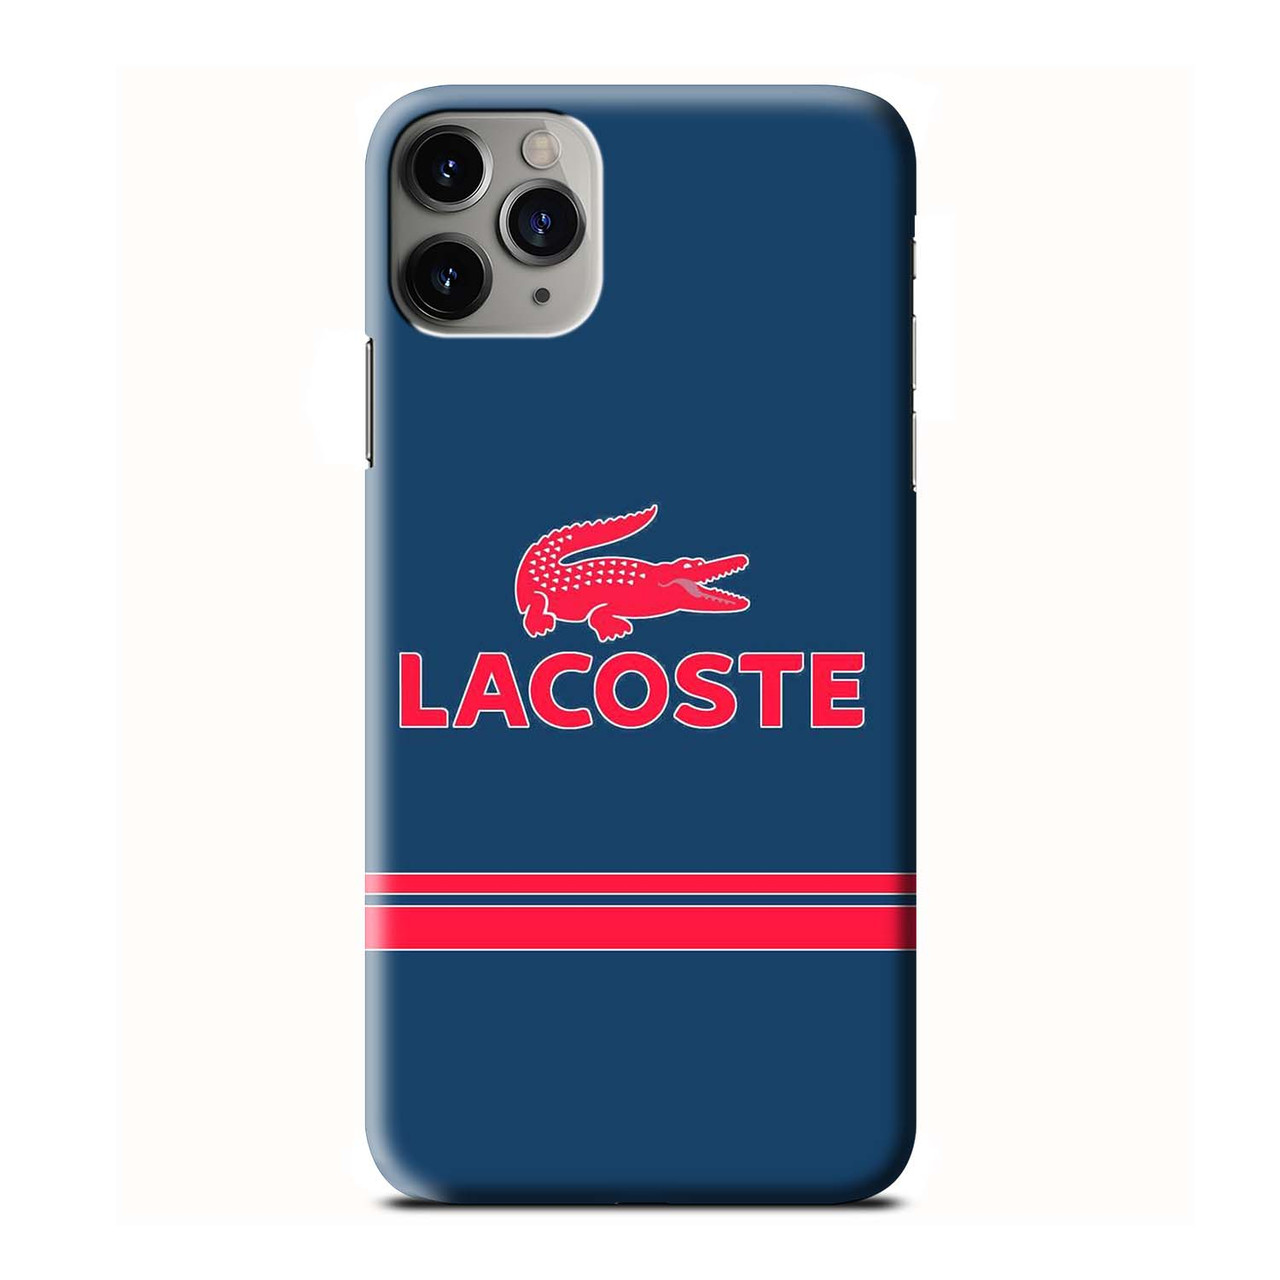 LACOSTE iPhone Case Cover